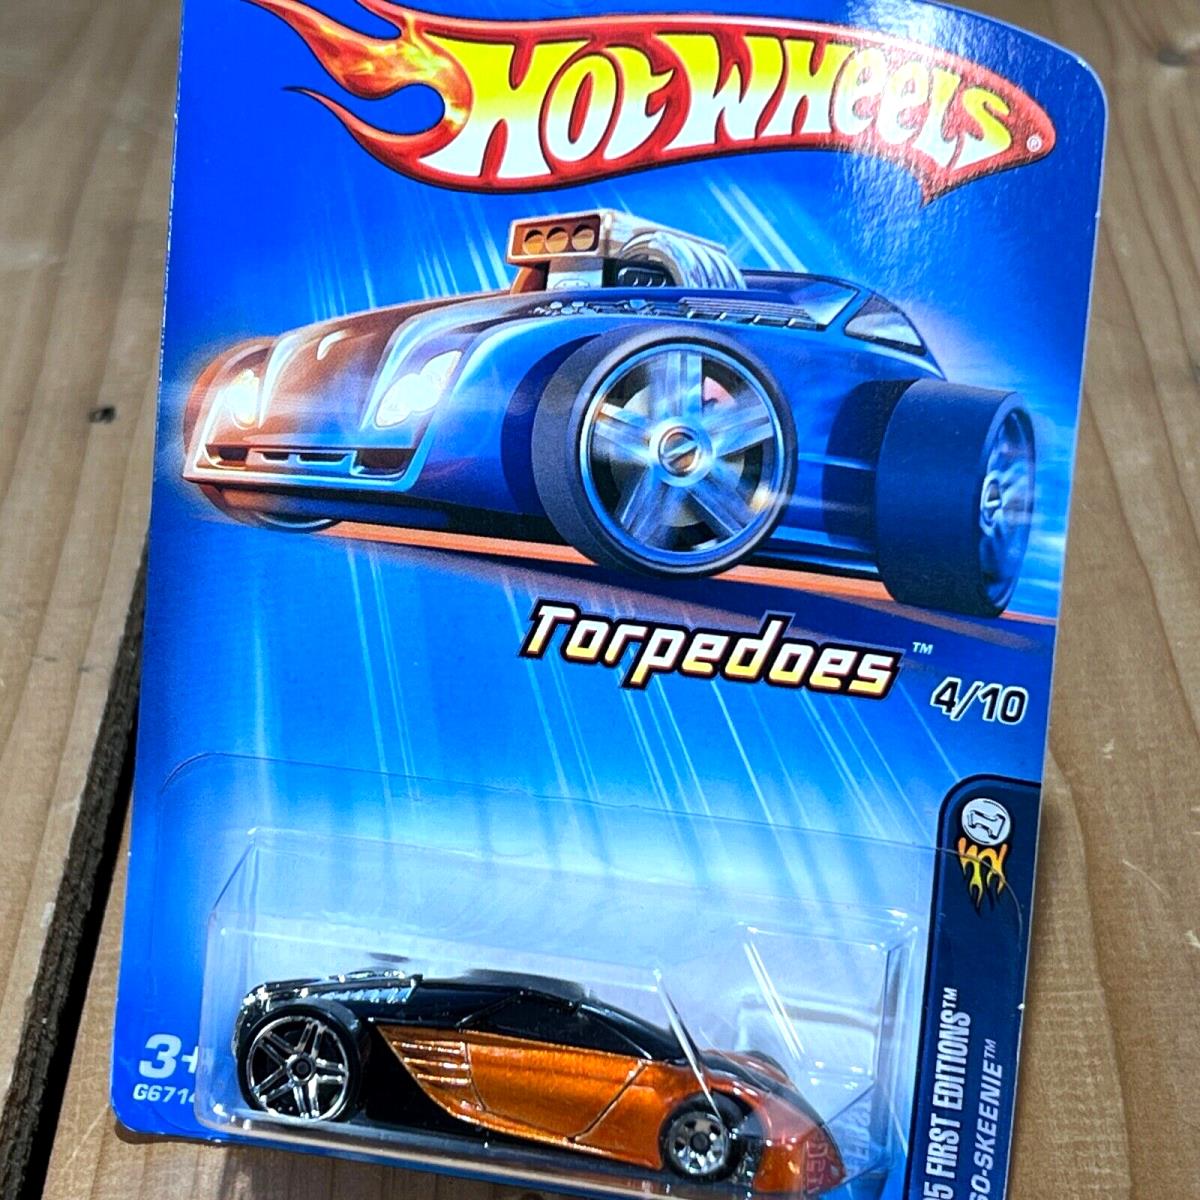 2005 Hot Wheels Torpedoes - Small Front Wheel Factory Error - 1:64 Diecast